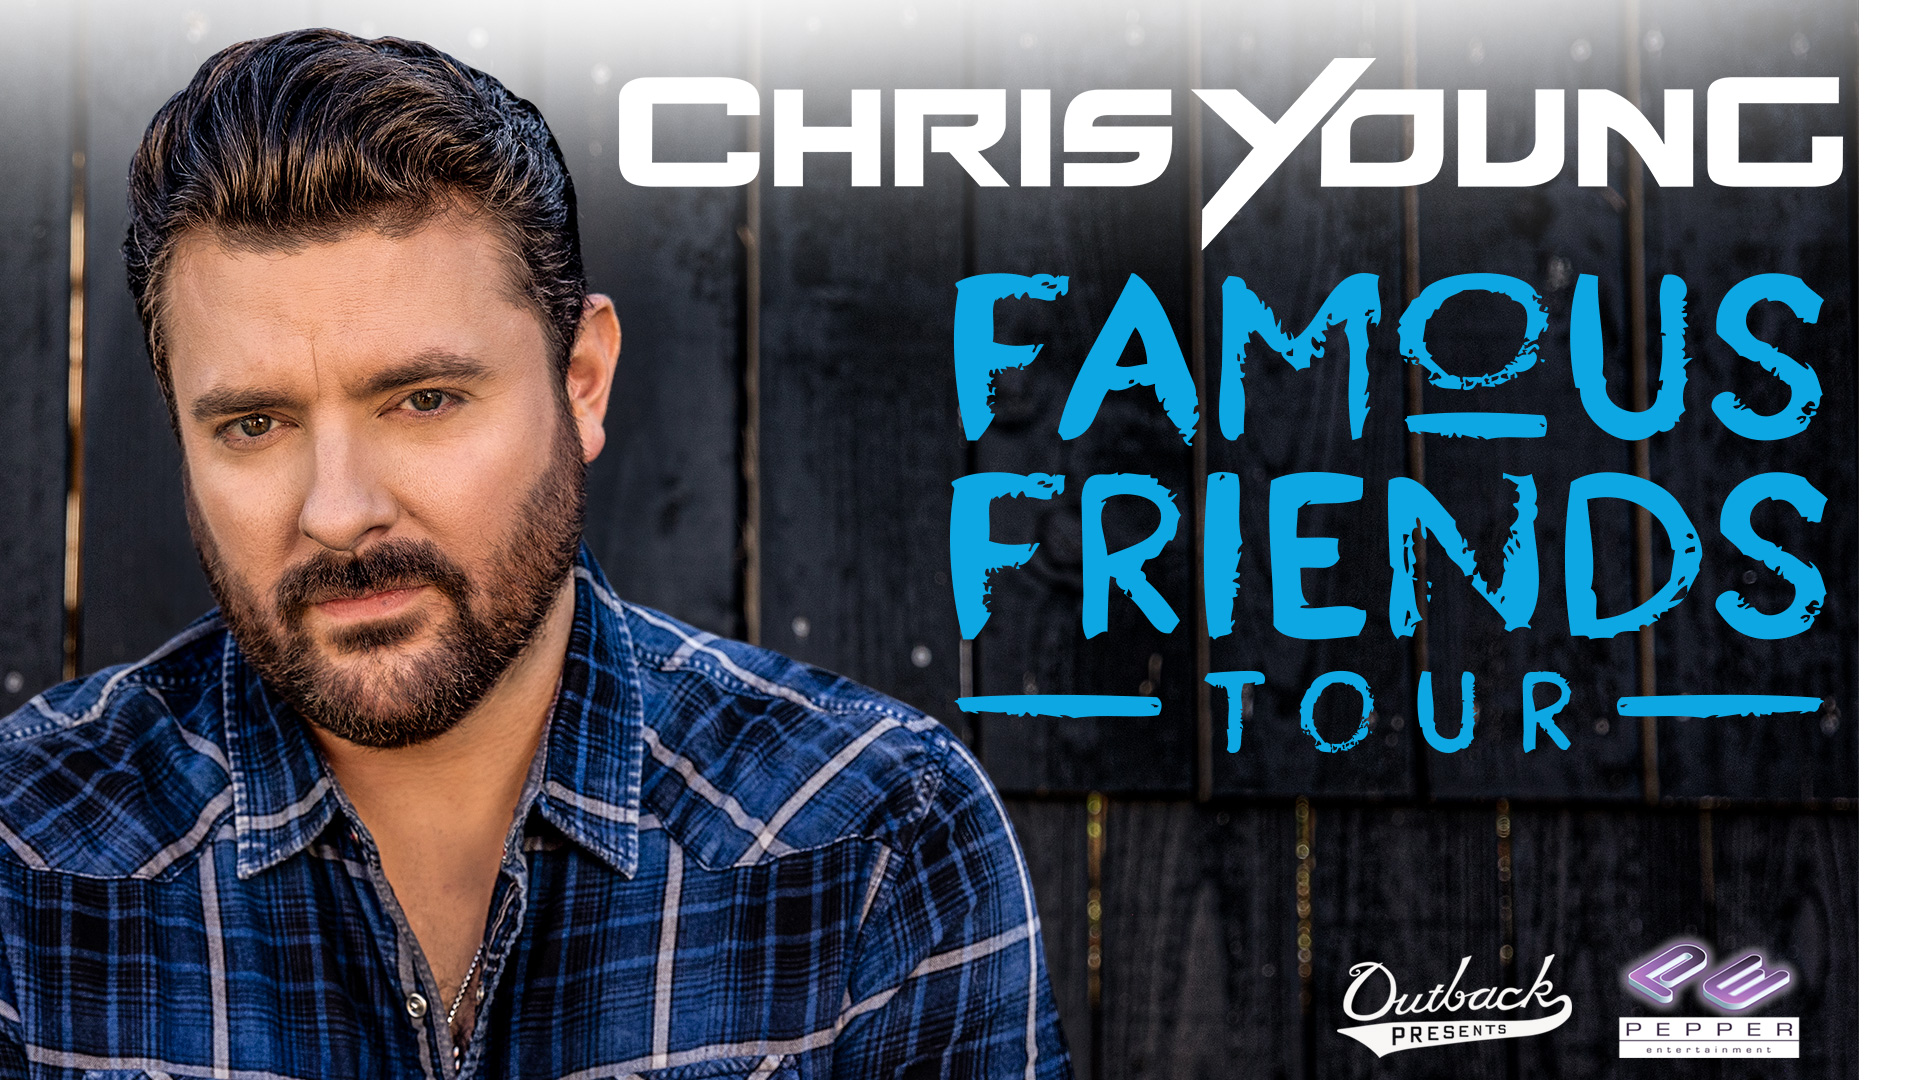 Chris Young Event Image